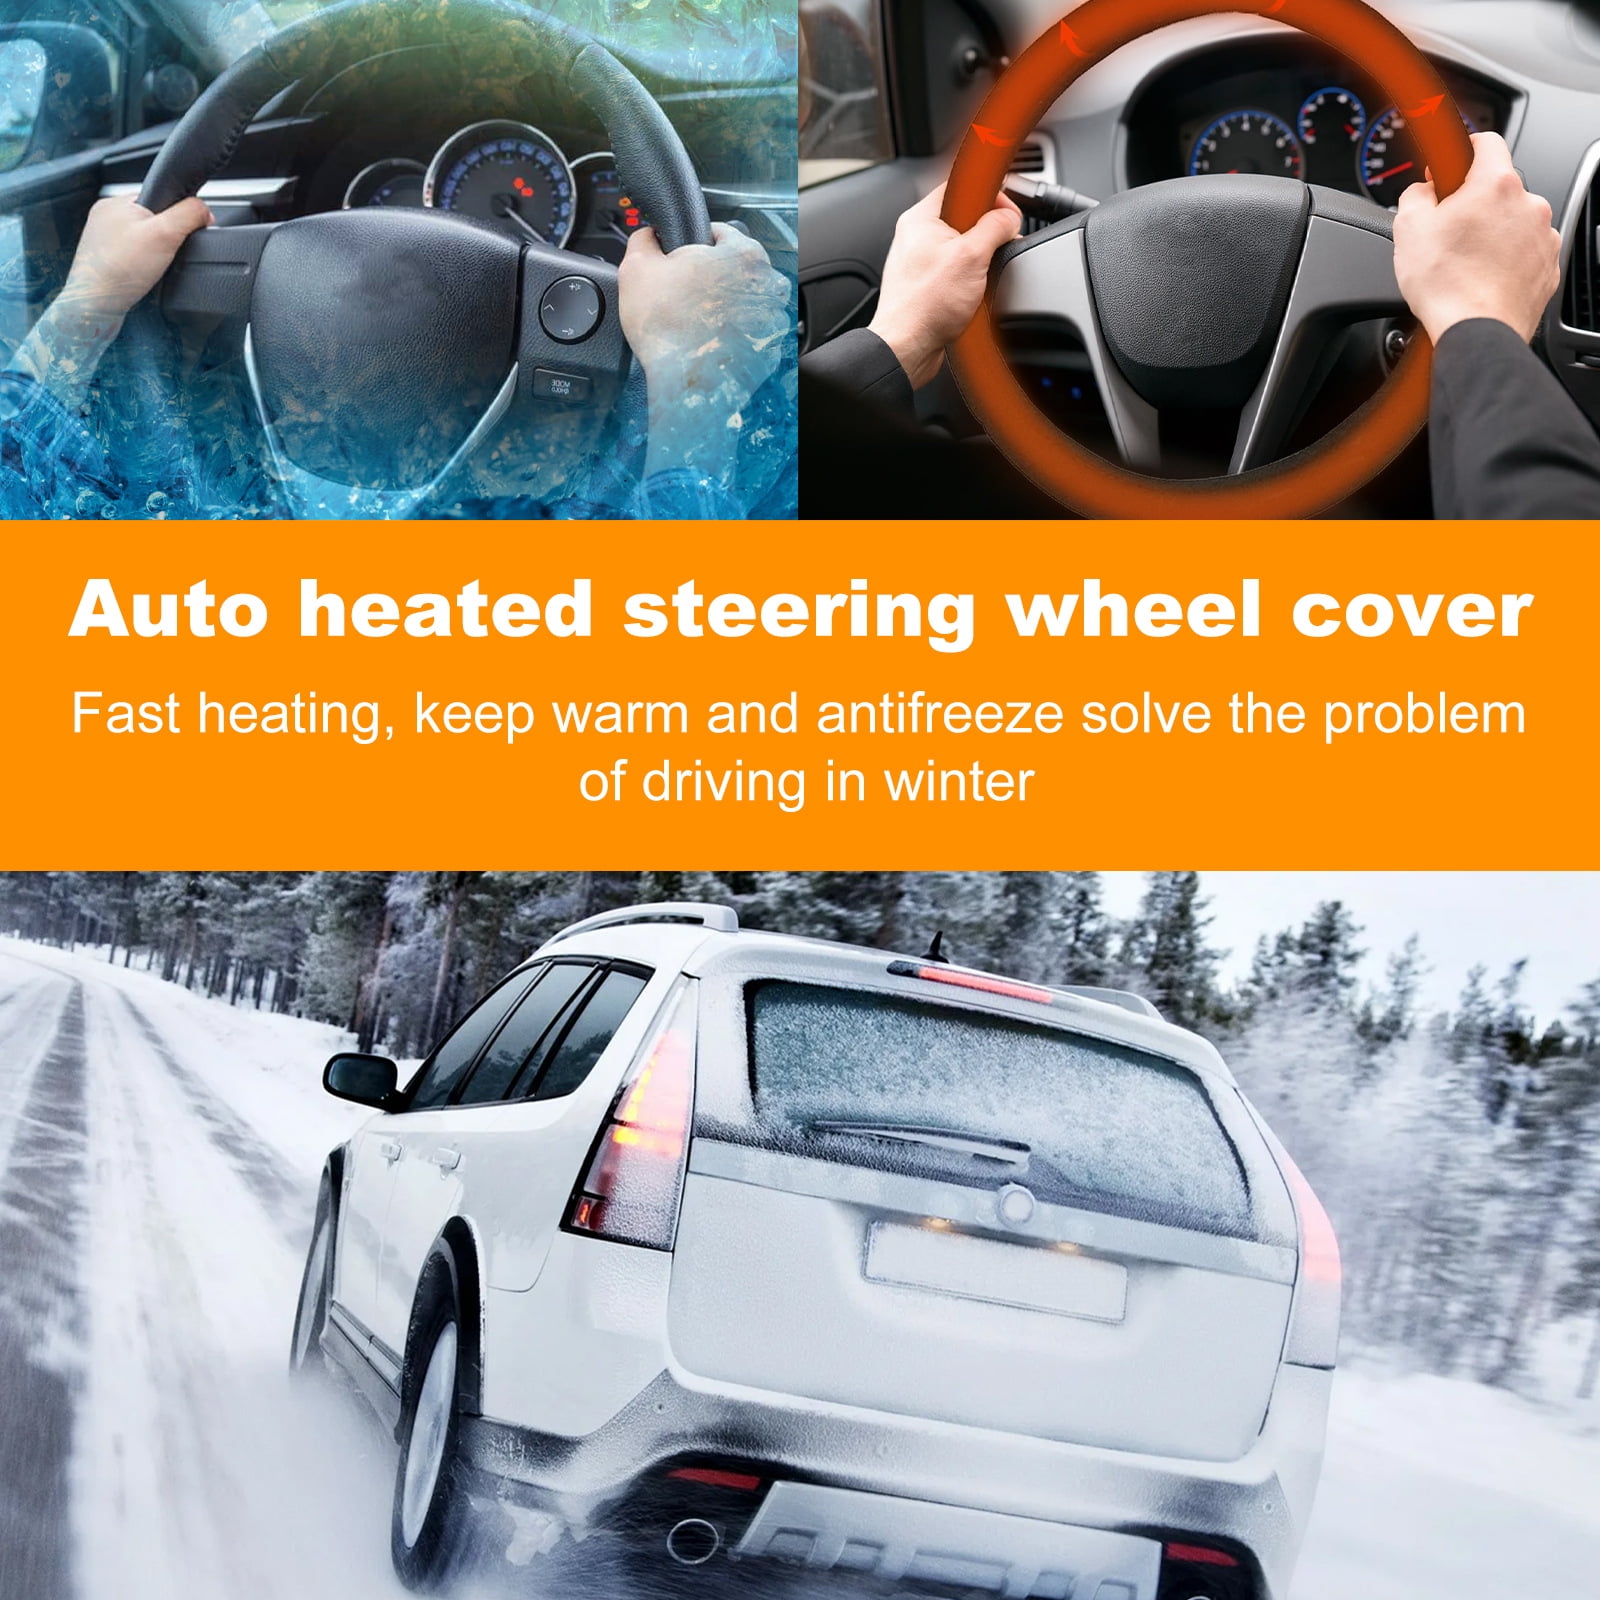 Zento Heated Steering Wheel Cover –Upgraded Heated Auto Hand Warmer  Steering Wheel Cover for Winter - Comfortable Premium Quality Universal Fit  11-12